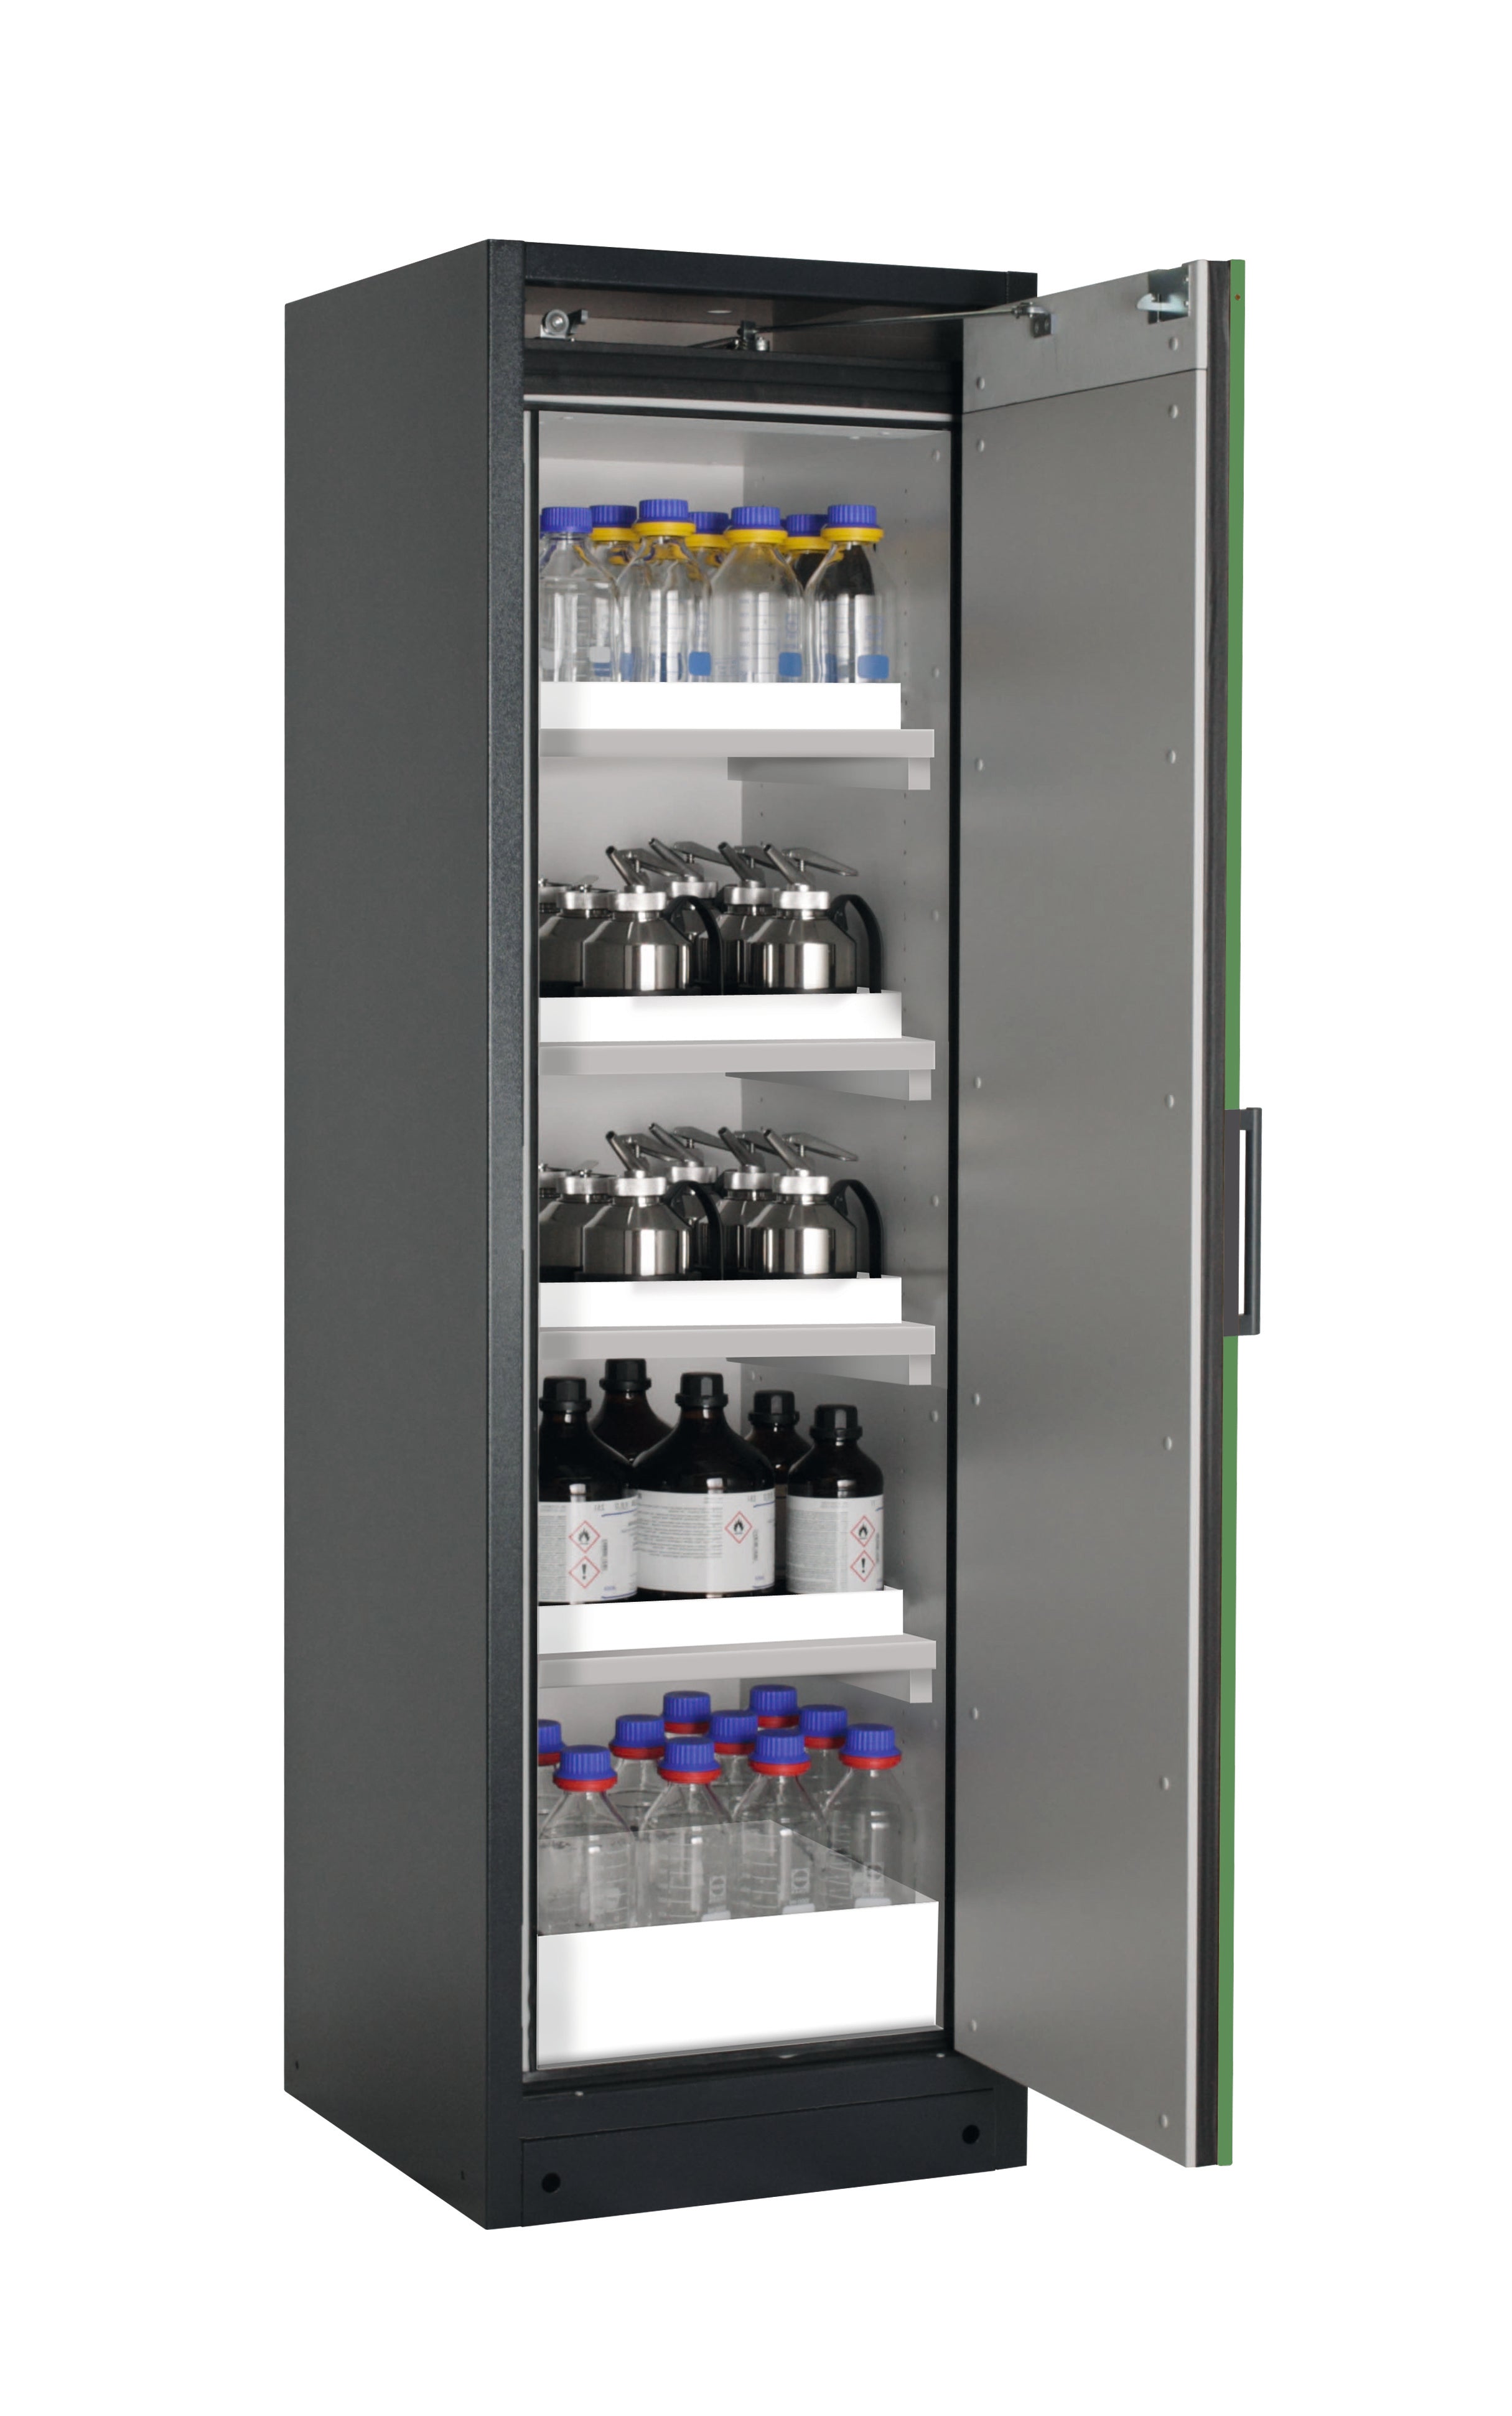 Type 90 safety storage cabinet Q-CLASSIC-90 model Q90.195.060.R in reseda green RAL 6011 with 4x tray shelf (standard) (polypropylene),